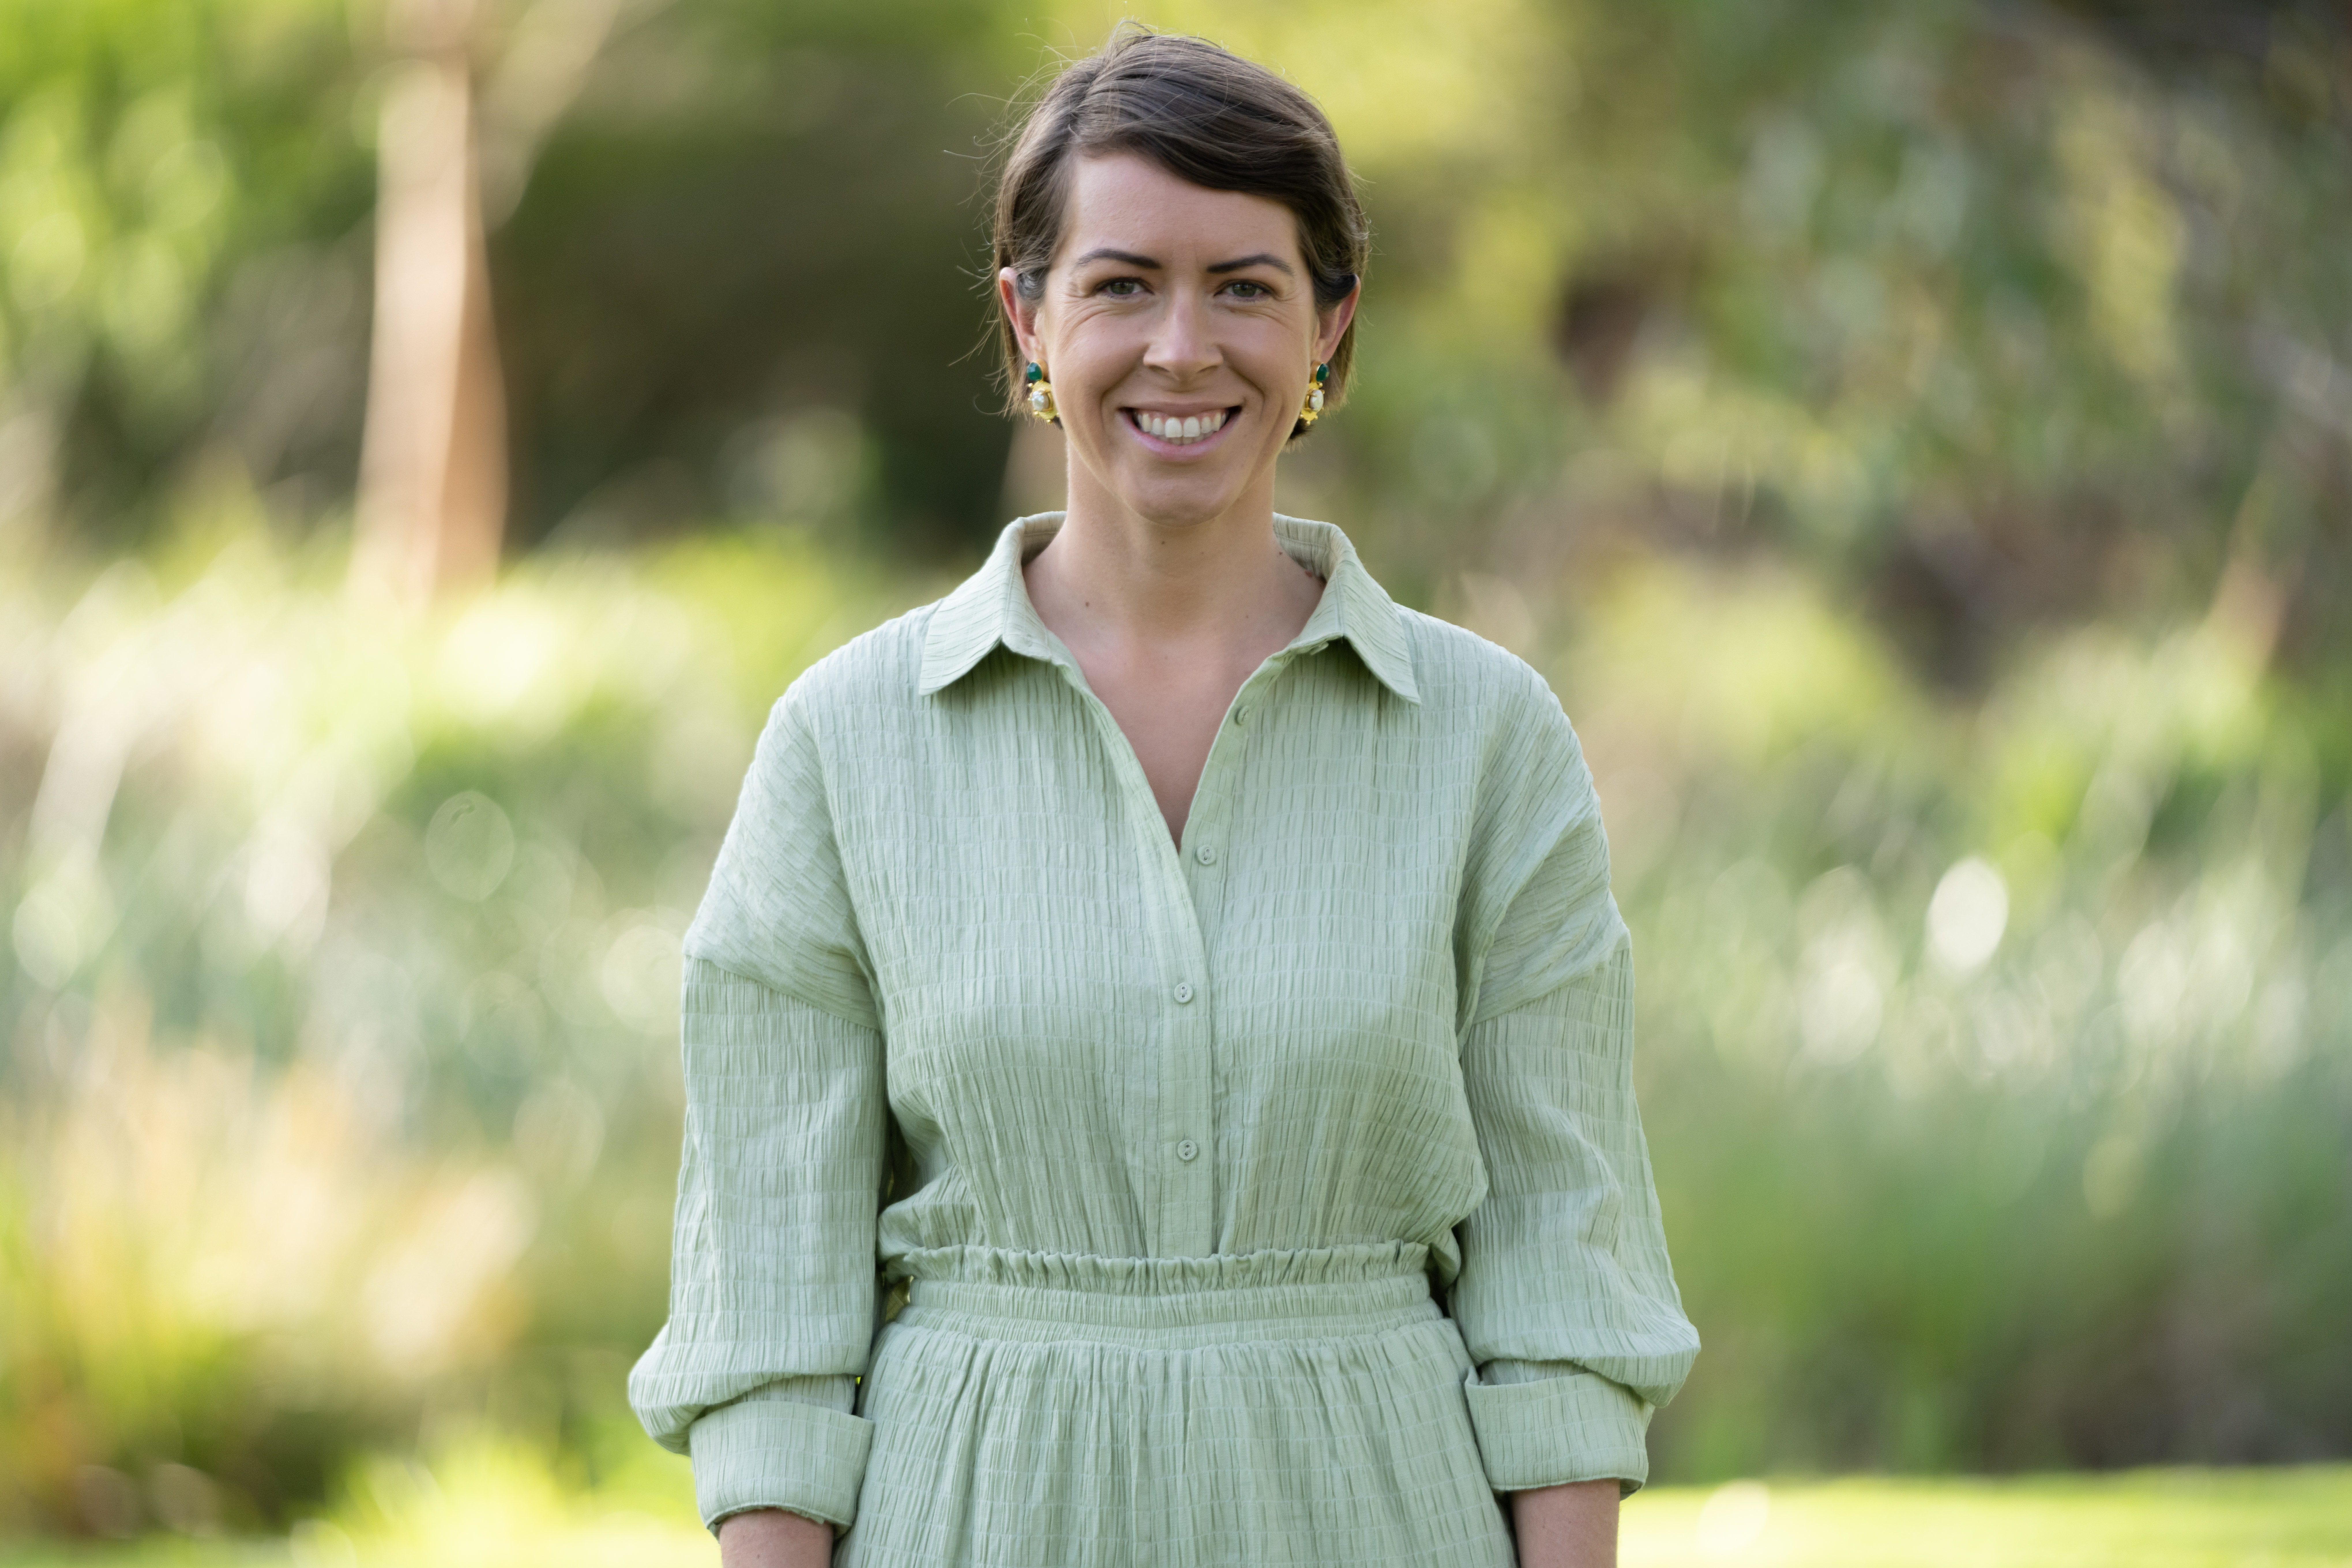 Greens state candidate Aleisha Smith stands against a background of trees.